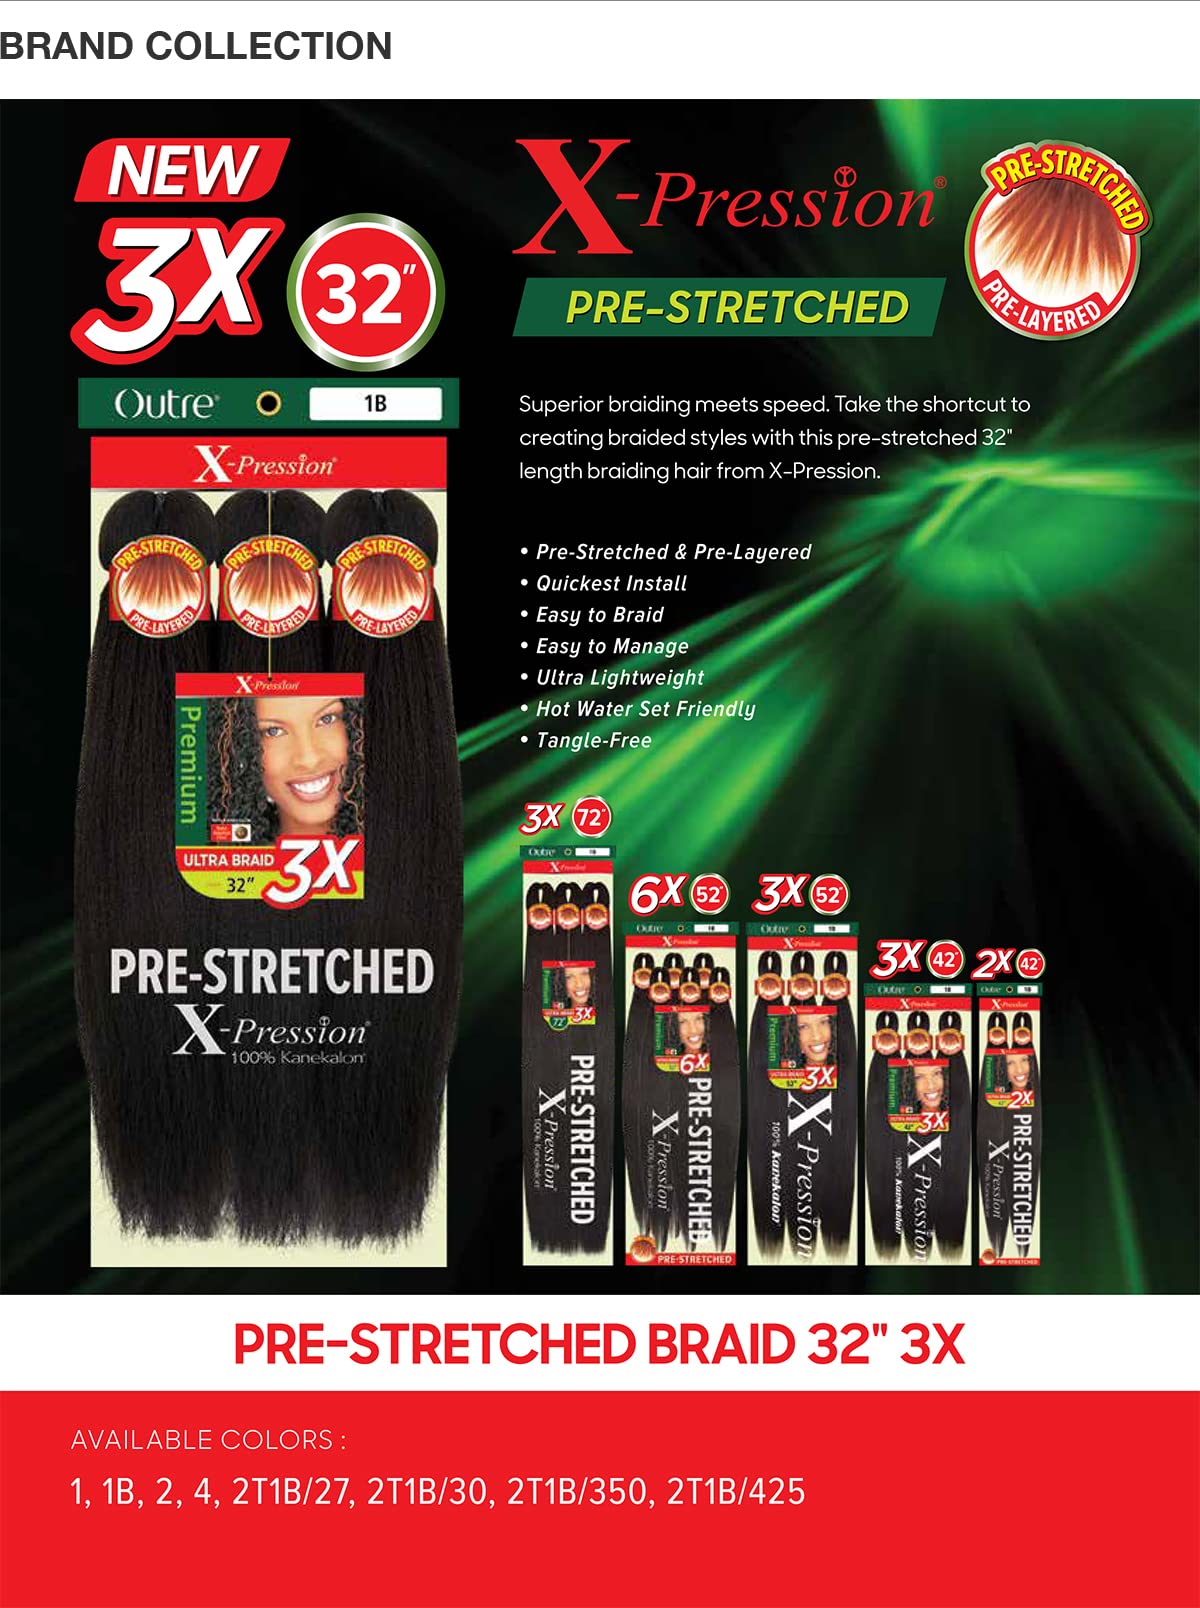 Sun Taiyang Outre Synthetic Pre Stretched ULTRA BRAID - XPRESSION 3X 32'' (Color:2 Dark Brown), 7.6 ounces